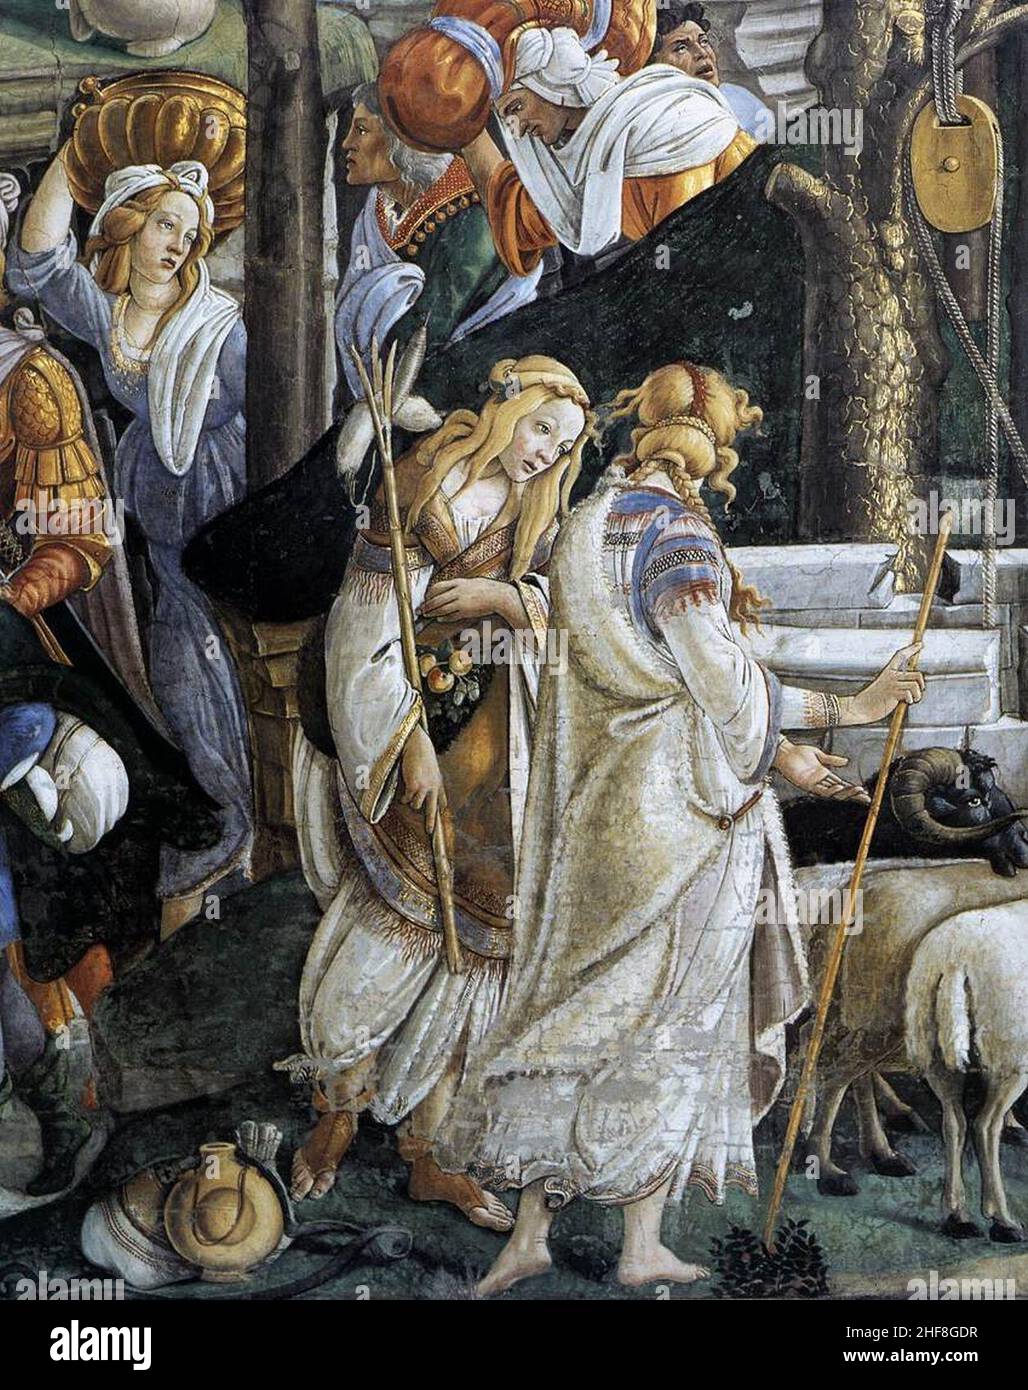 Sandro Botticelli - The Trials and Calling of Moses (detail) Stock Photo